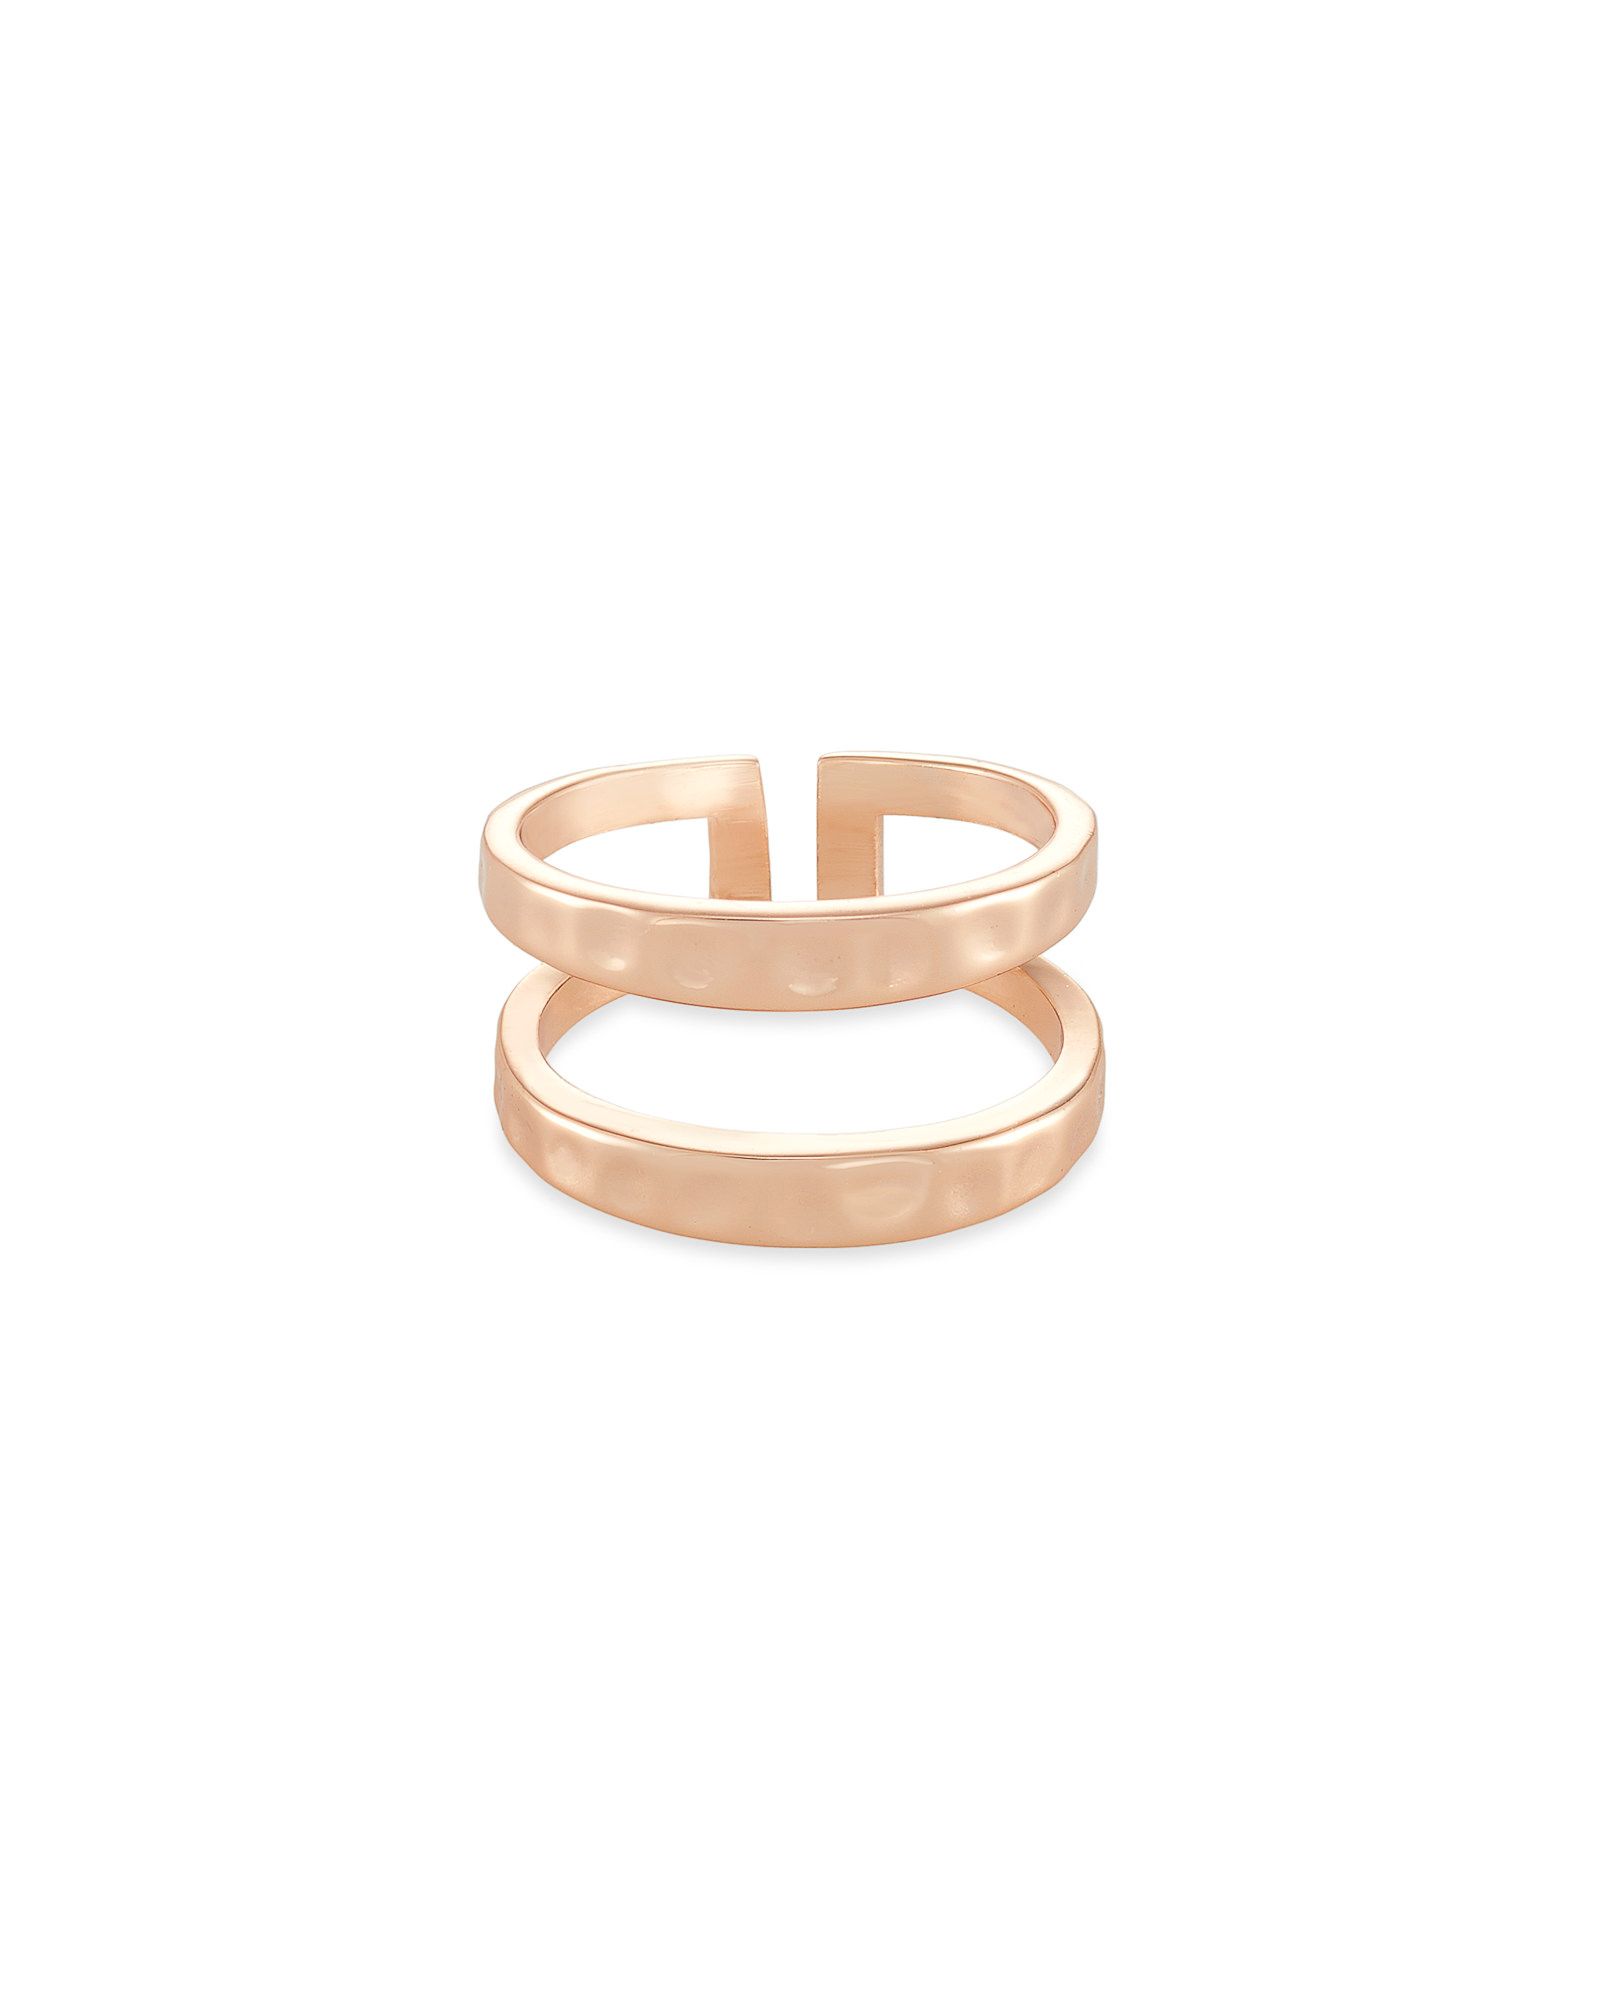 Zorte Double Band Ring in Rose Gold - 6 | Kendra Scott